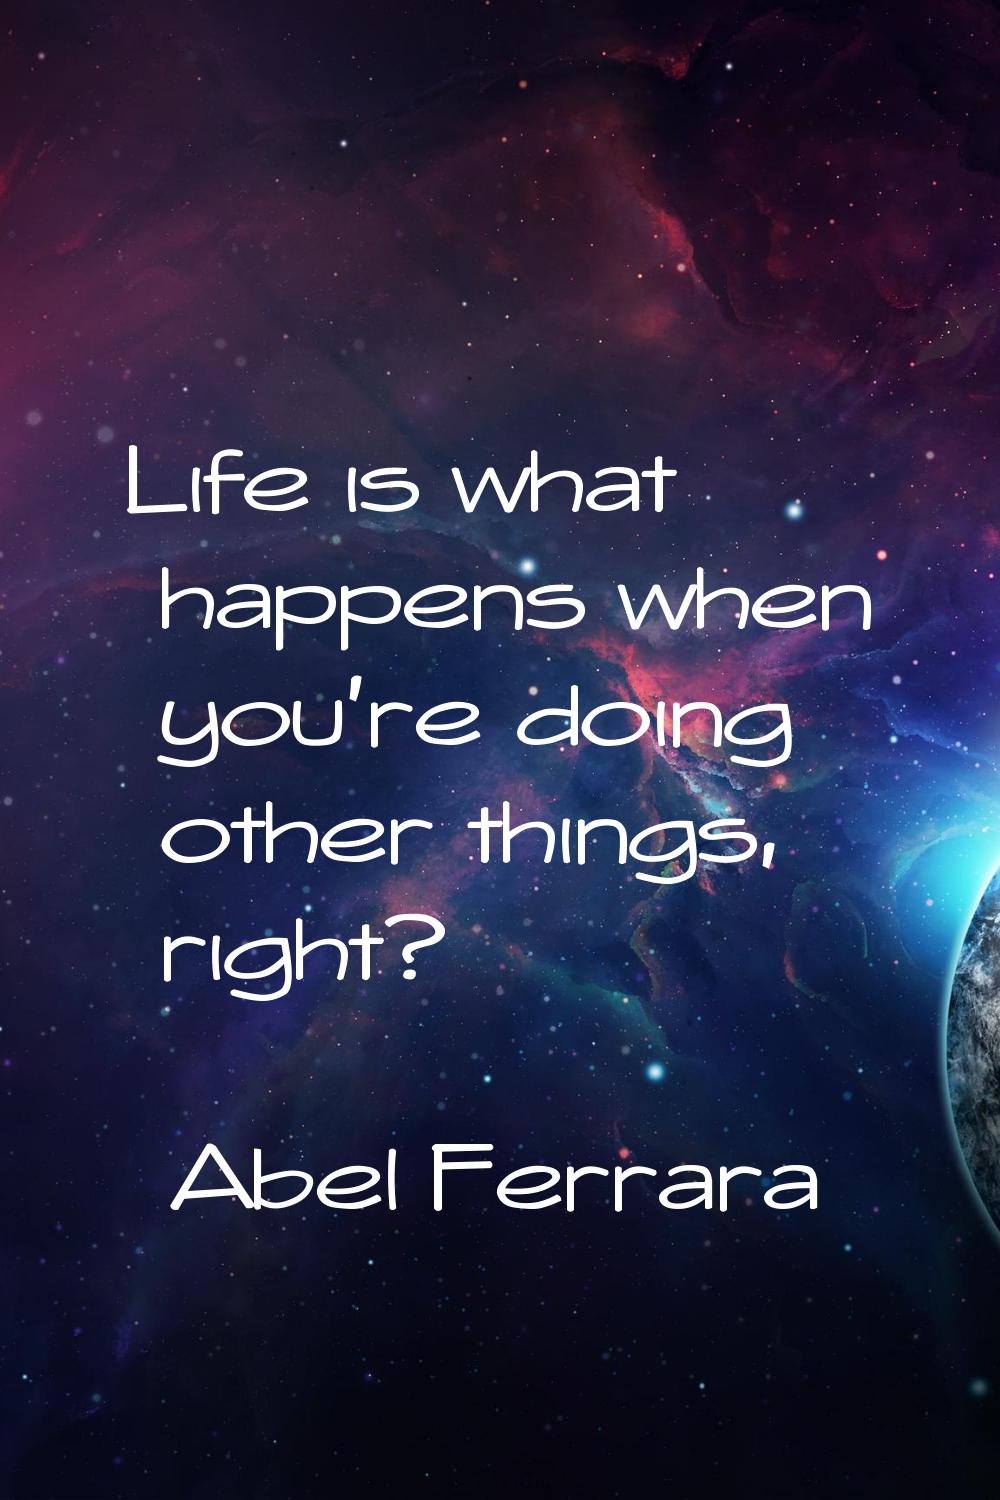 Life is what happens when you're doing other things, right?